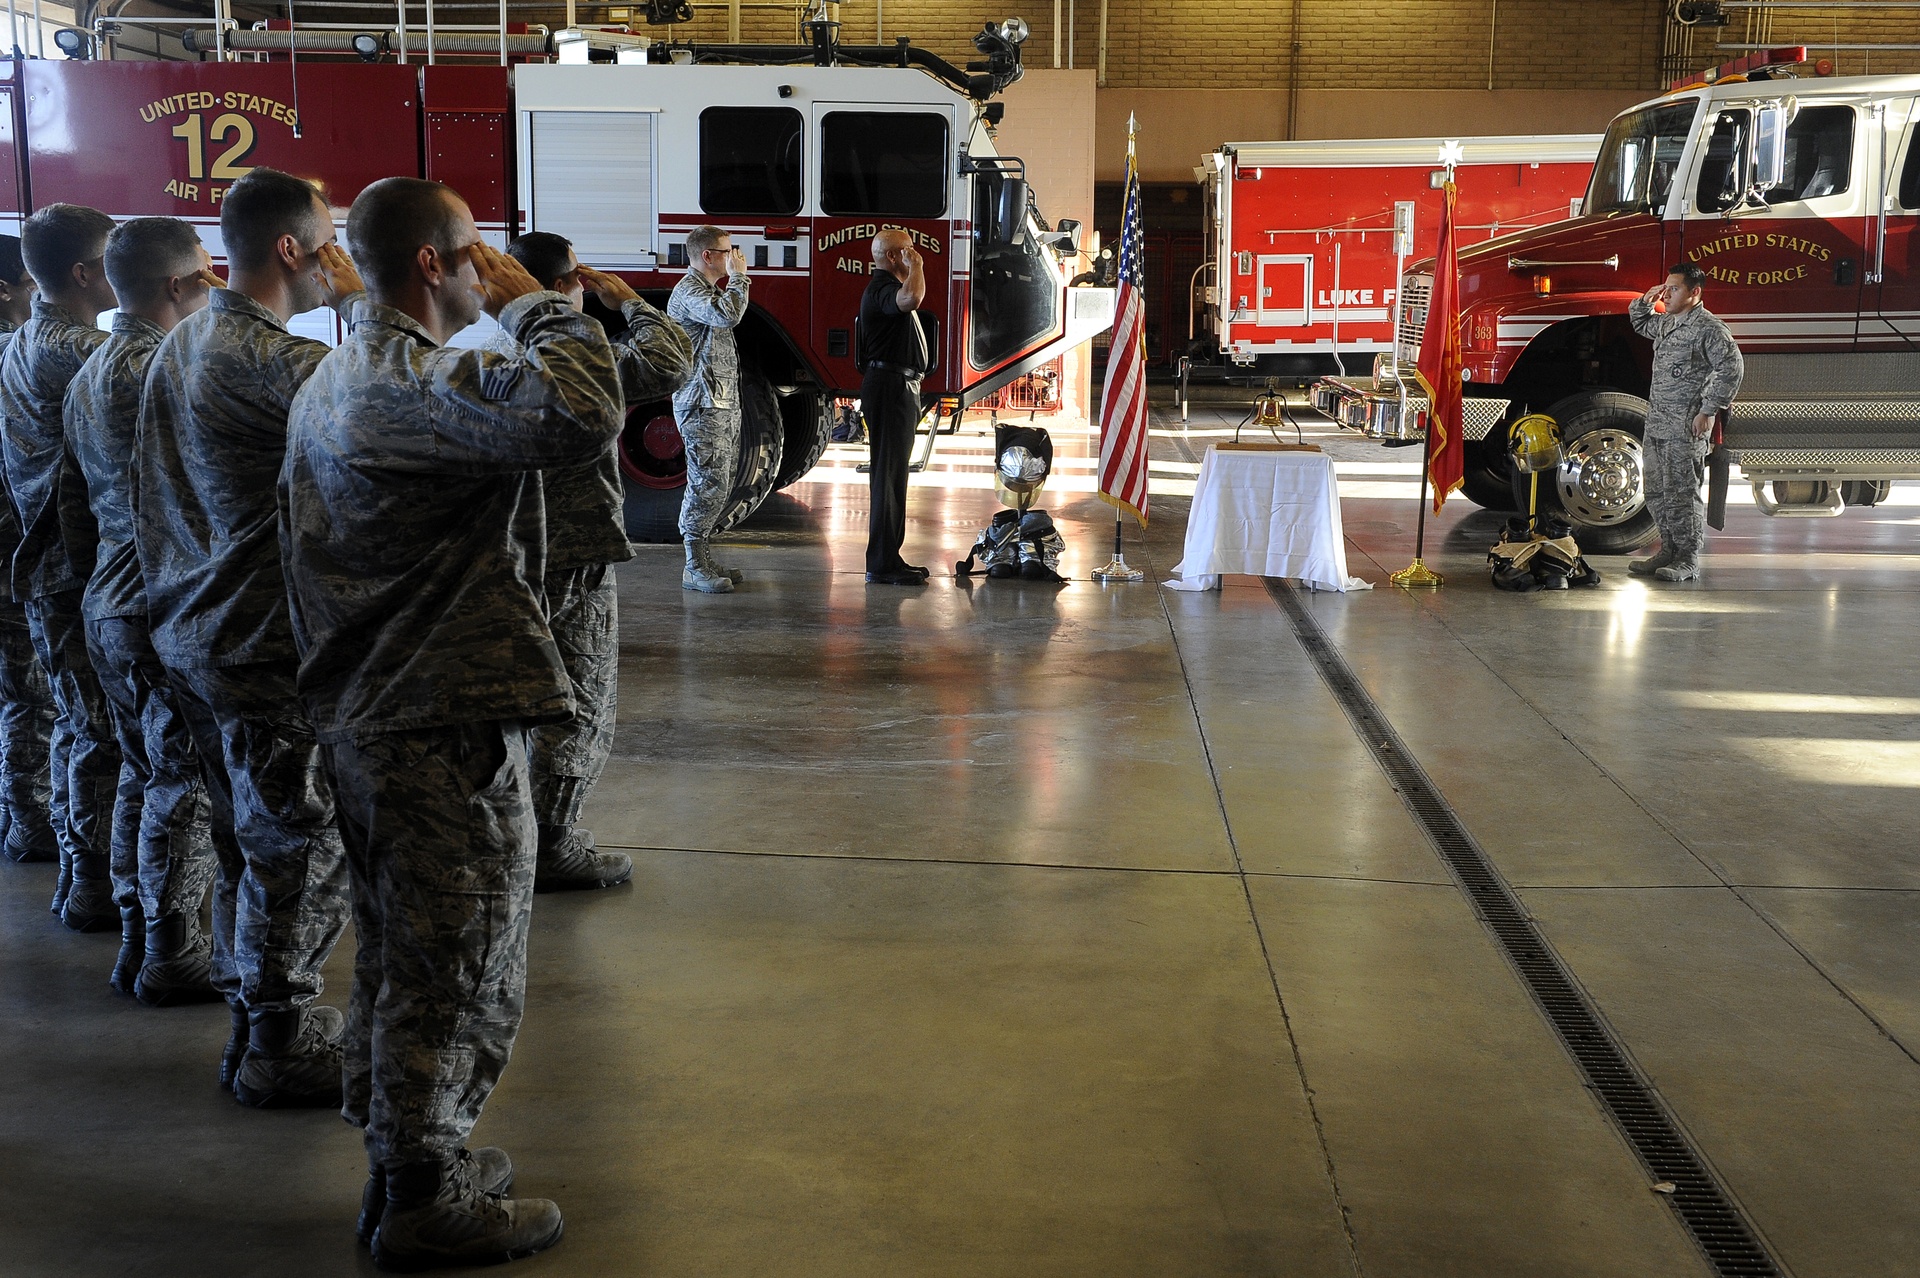 Courageous Hearts benefits Luke AFB Fire Station